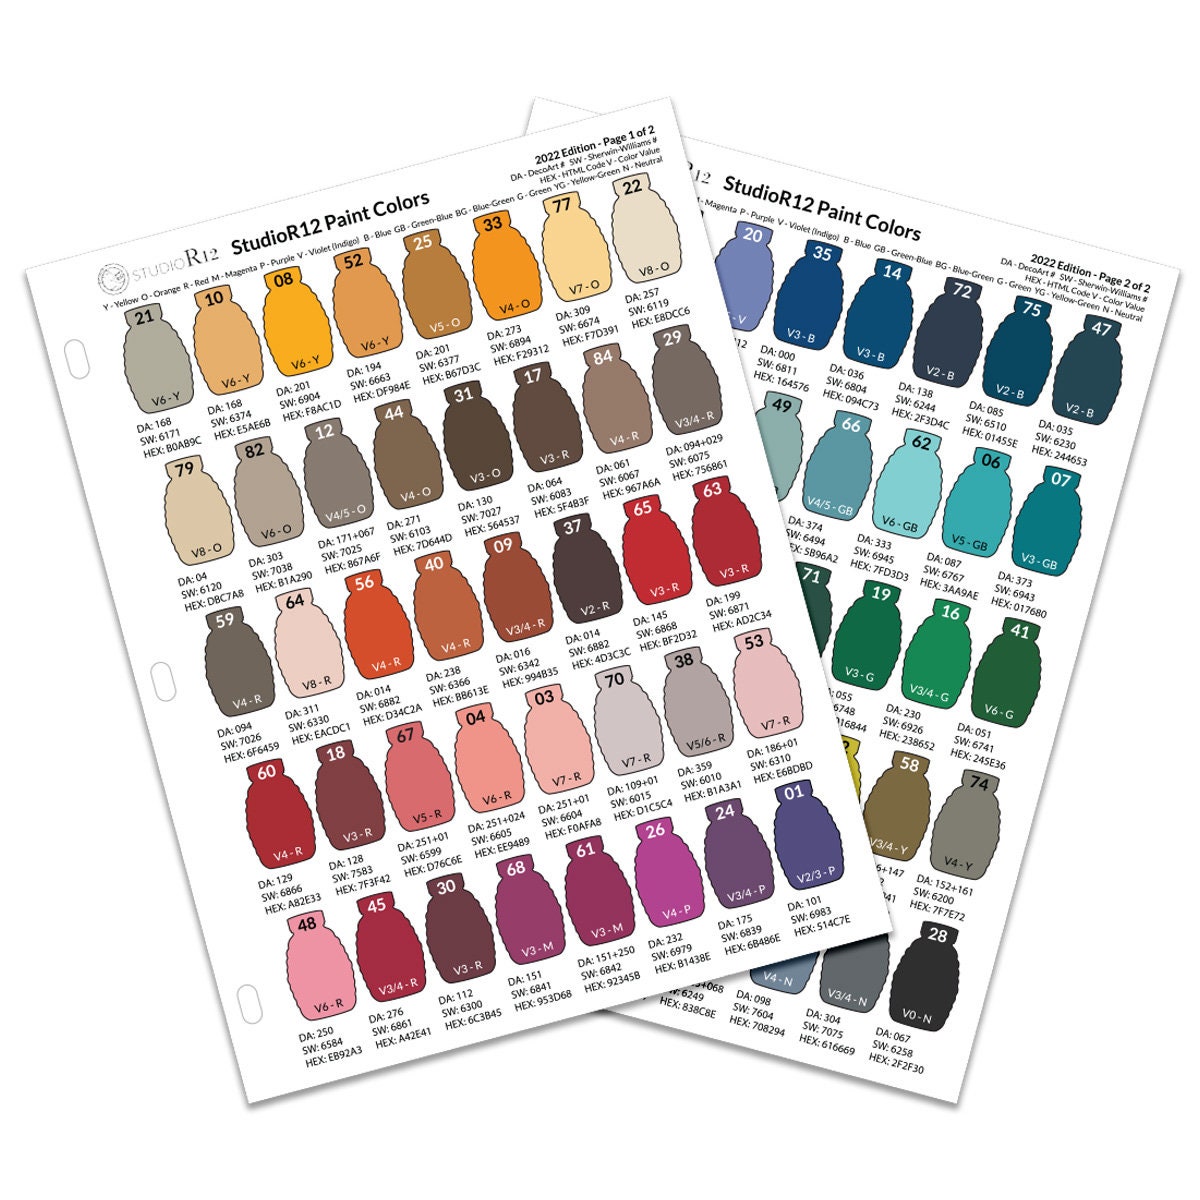 36 Color Acrylic Paint Value Set by Craft Smart®